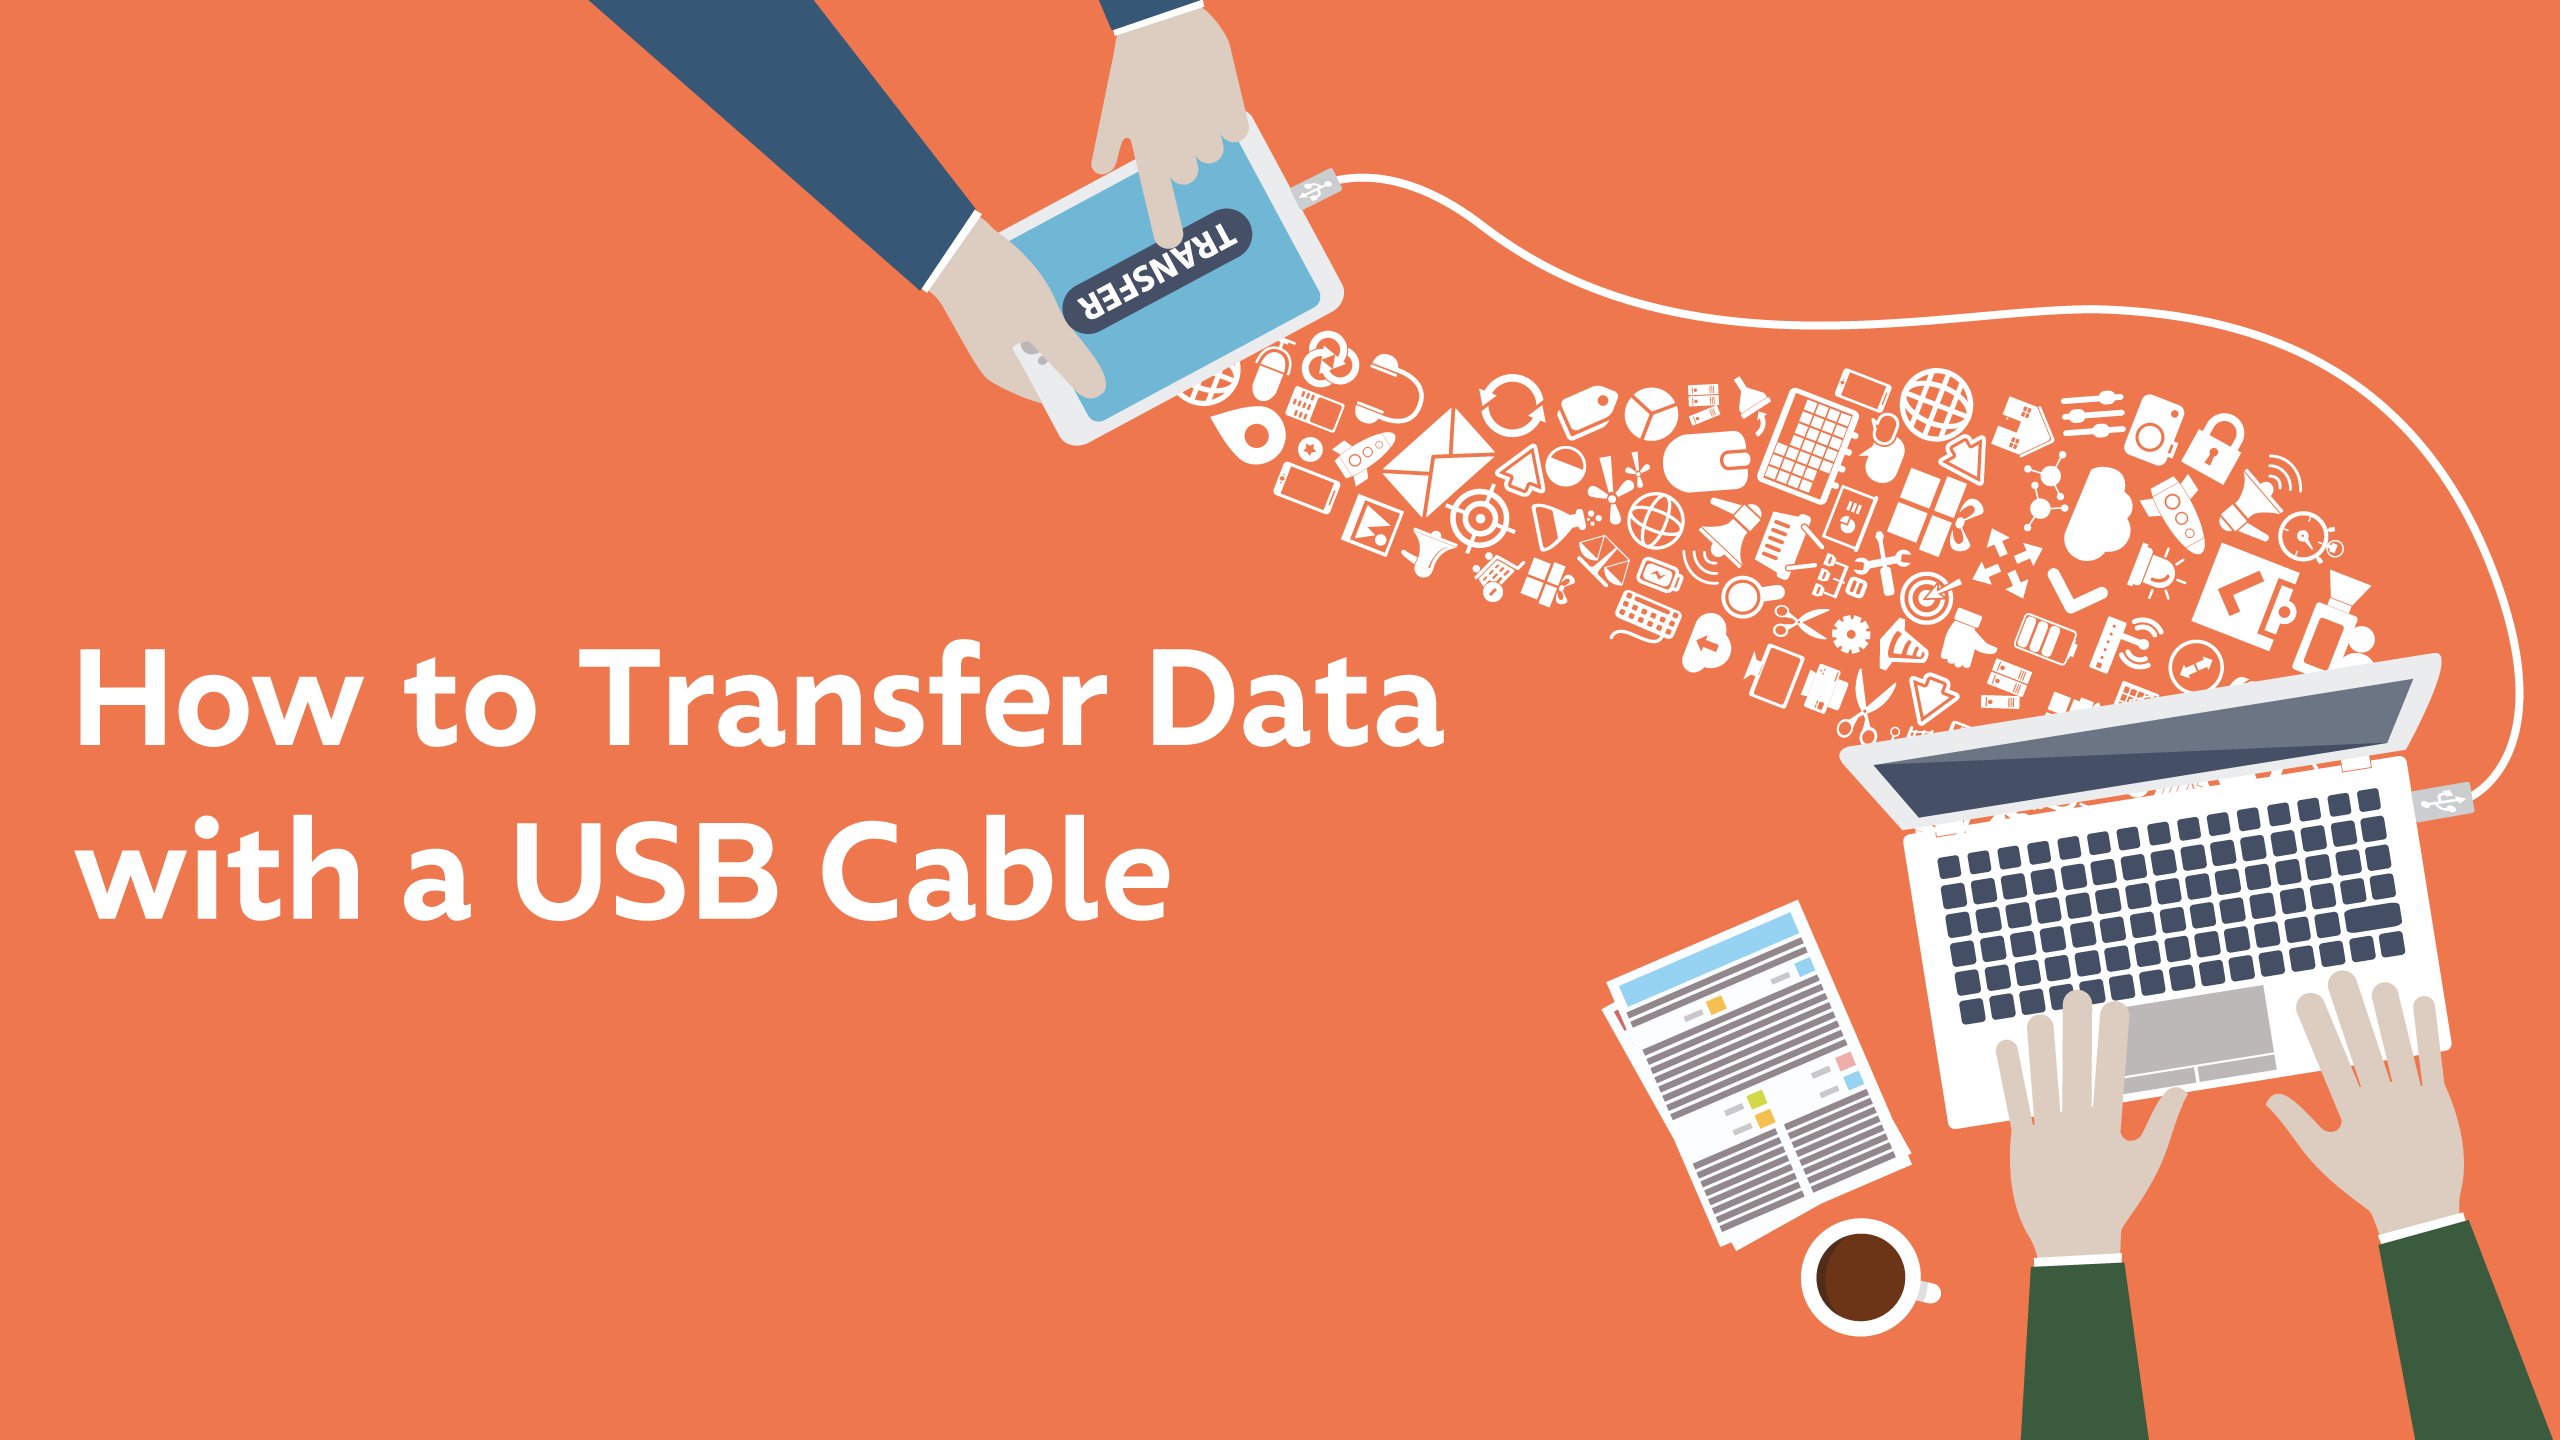 How To Transfer Data With a USB Cable